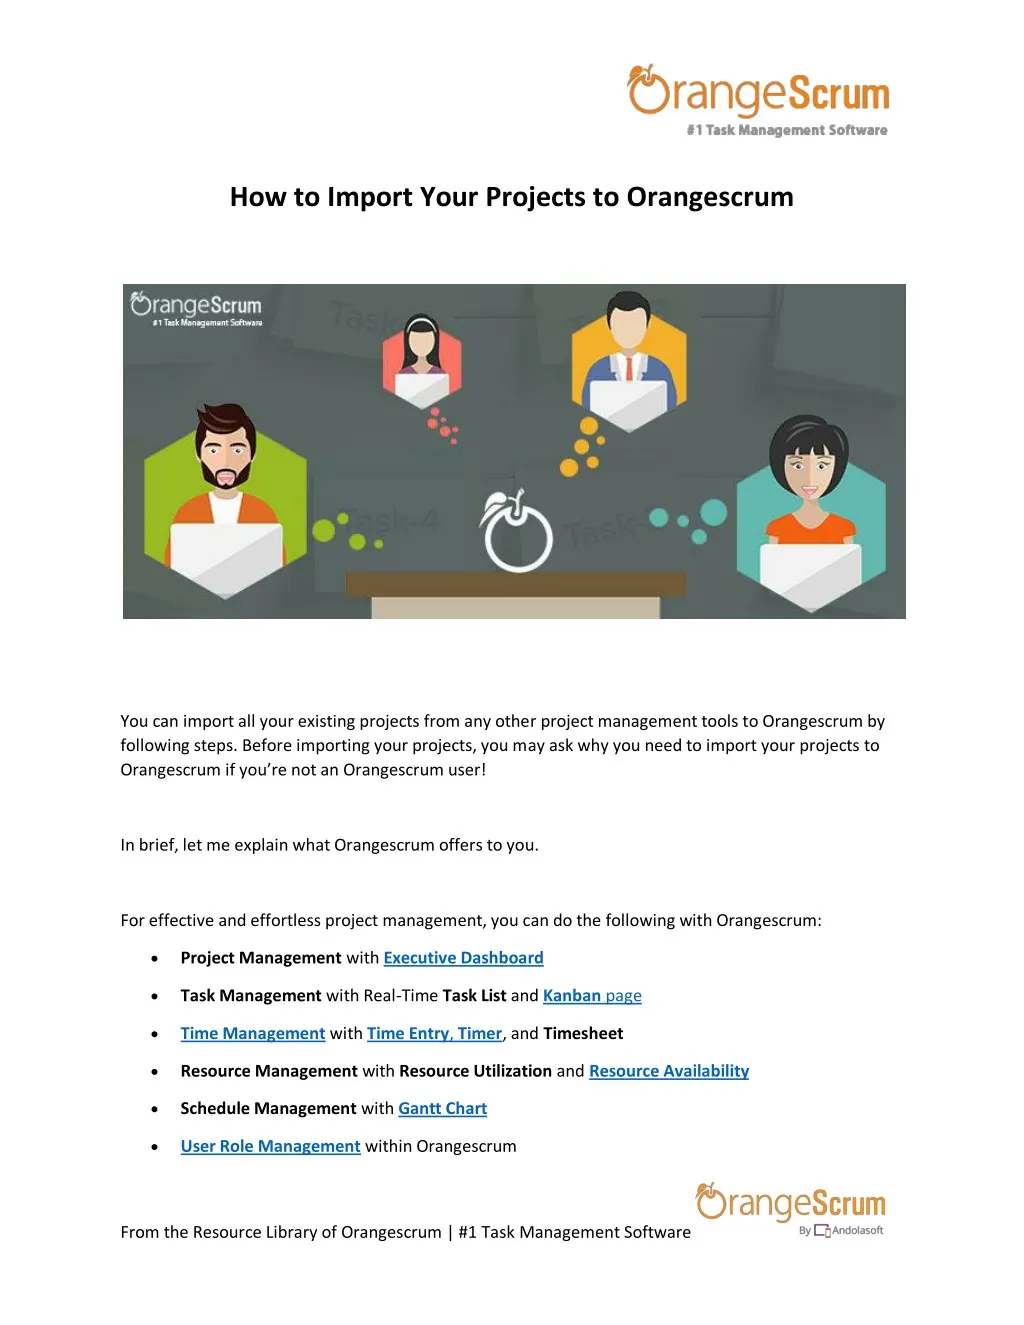 how to import your projects to orangescrum